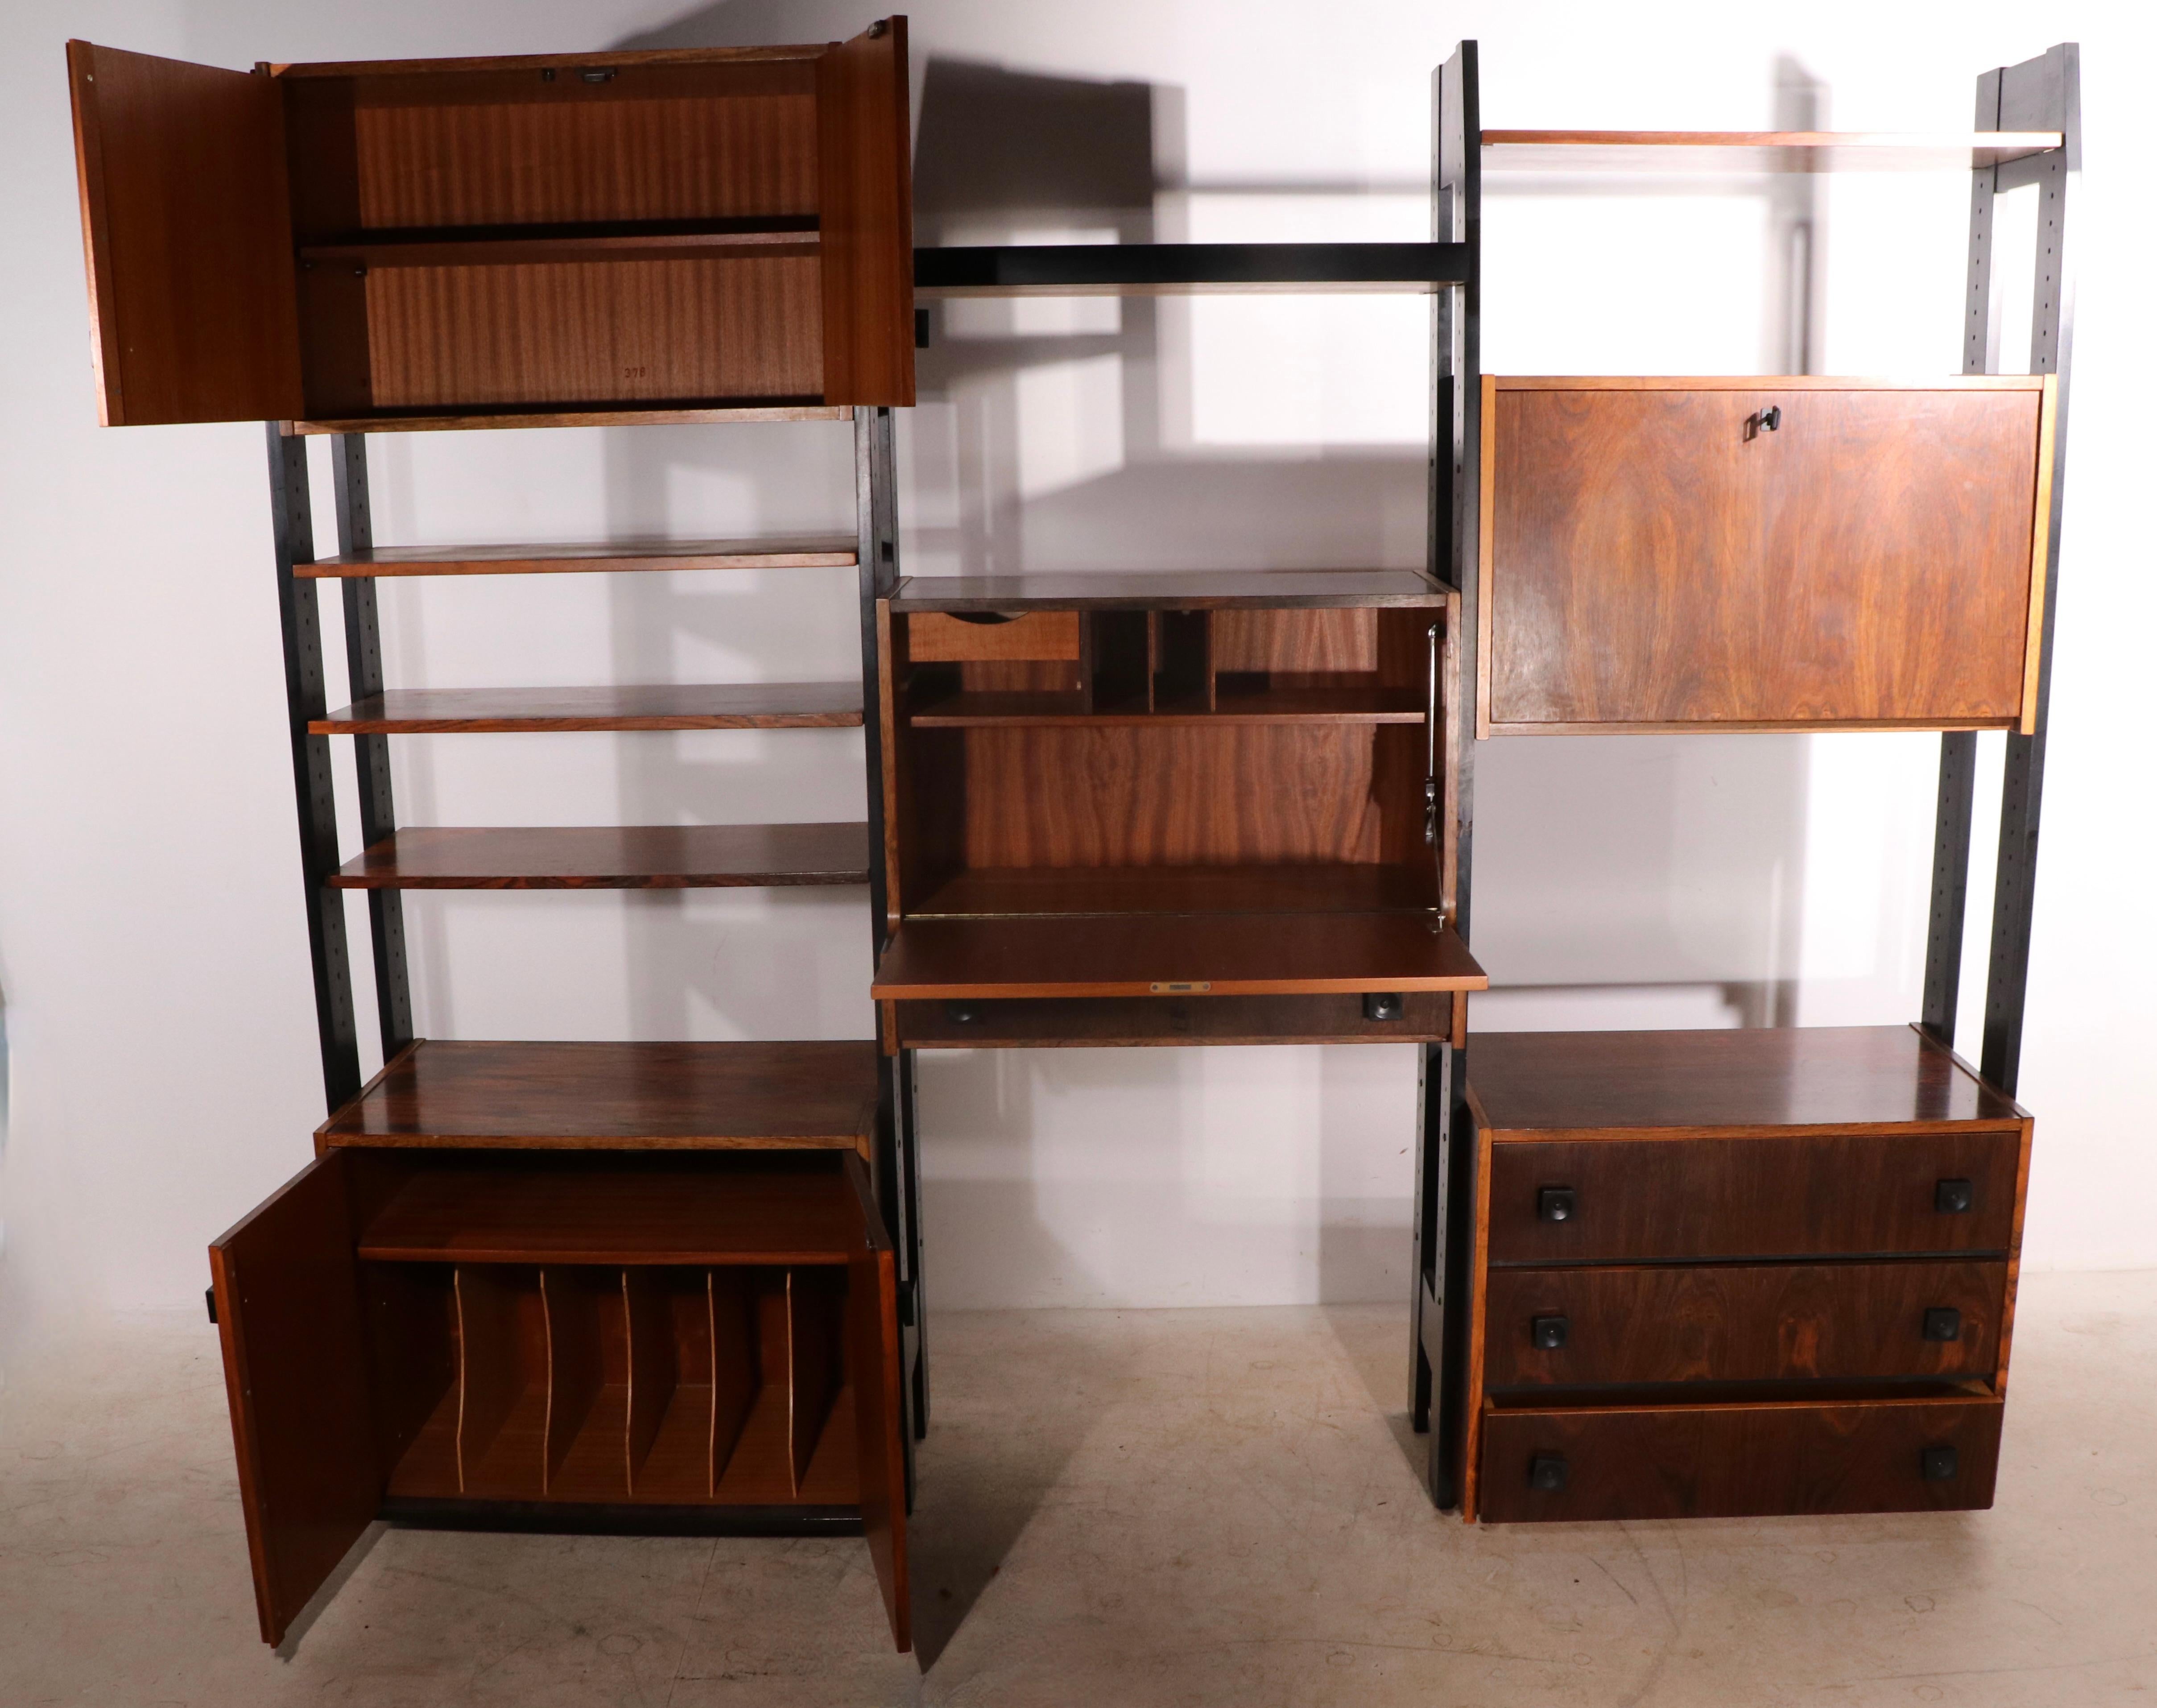 Exceptional Danish Mid-Century Modern freestanding wall unit having 3 bays, including ( 5 ) rosewood cabinets and ( 5 ) rosewood shelves, with original black paint finished solid wood vertical supports. and black handles. The cabinets include a fall